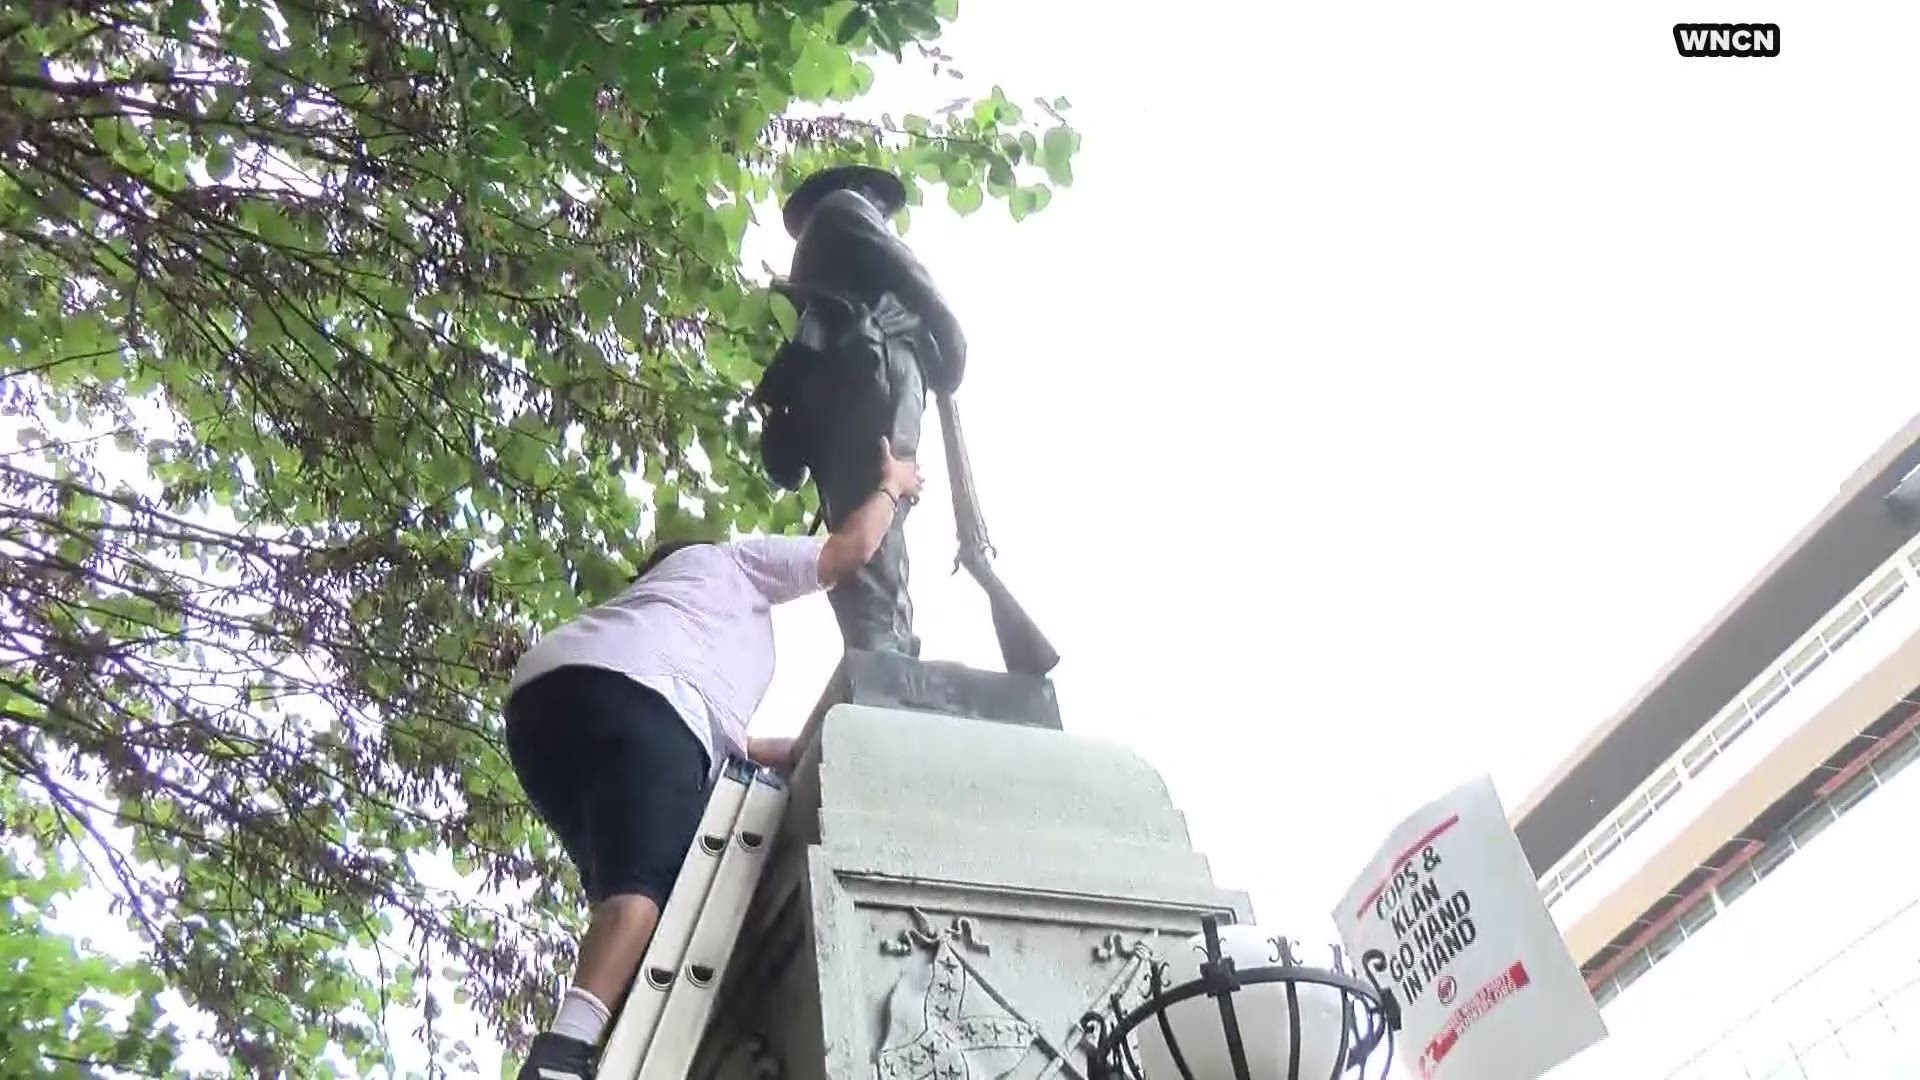 Confederate monument vandals hit wrong Lee statue. Vandals instead hit General William C. Lee, a WWII statue in Dunn, NC.